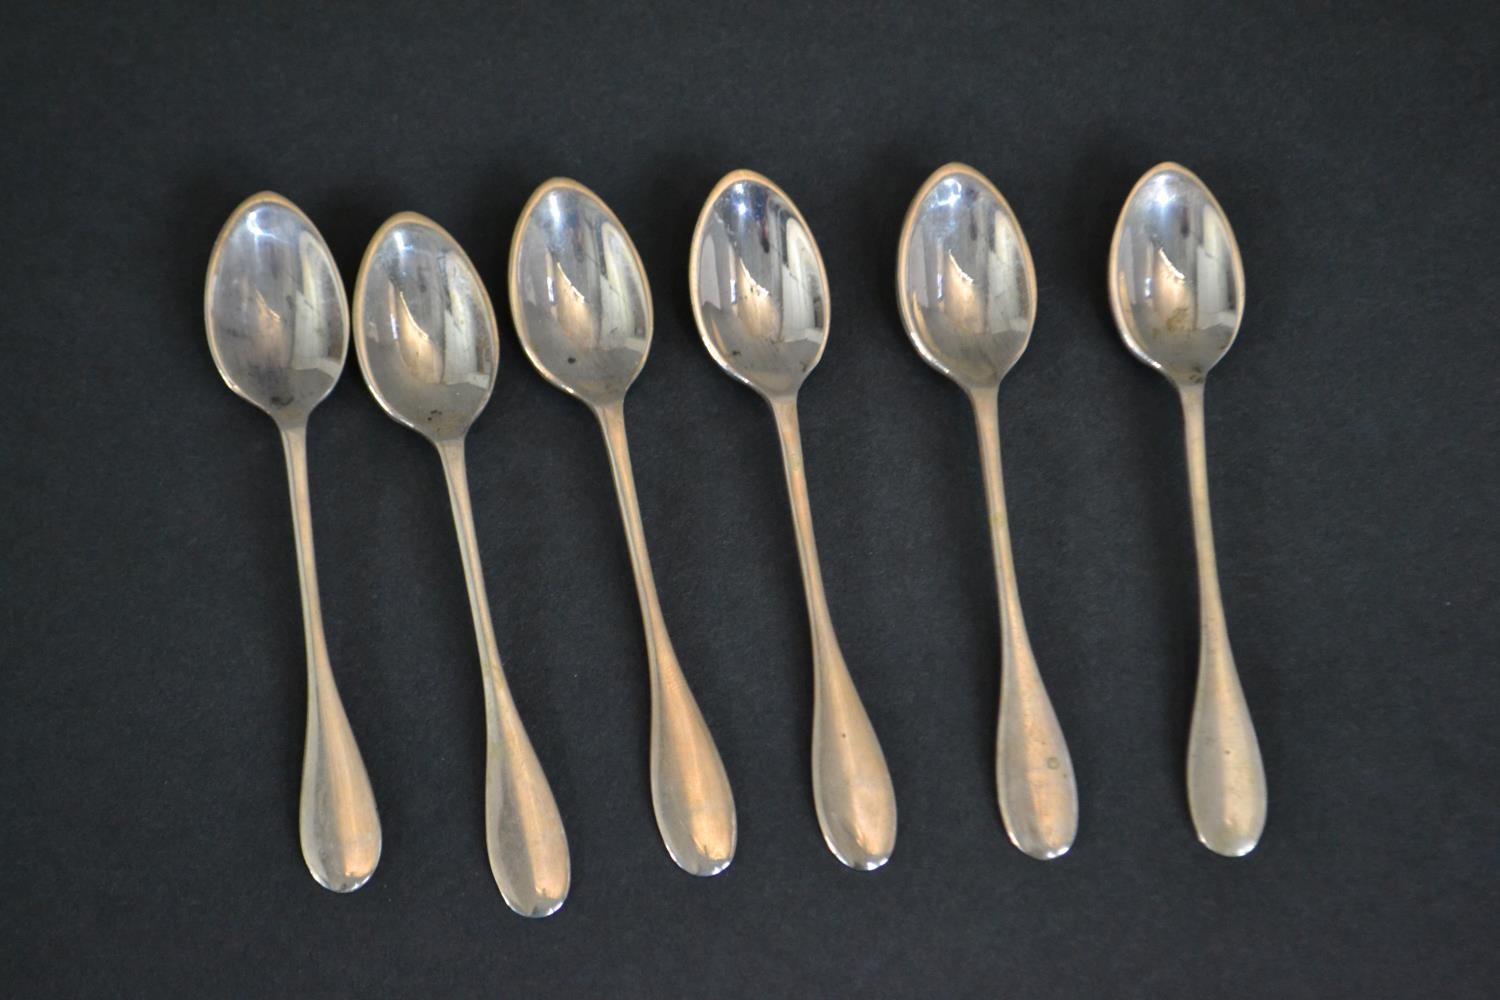 A set of six Egyptian silver tea spoons with Egyptian hallmarks. Weight 123g